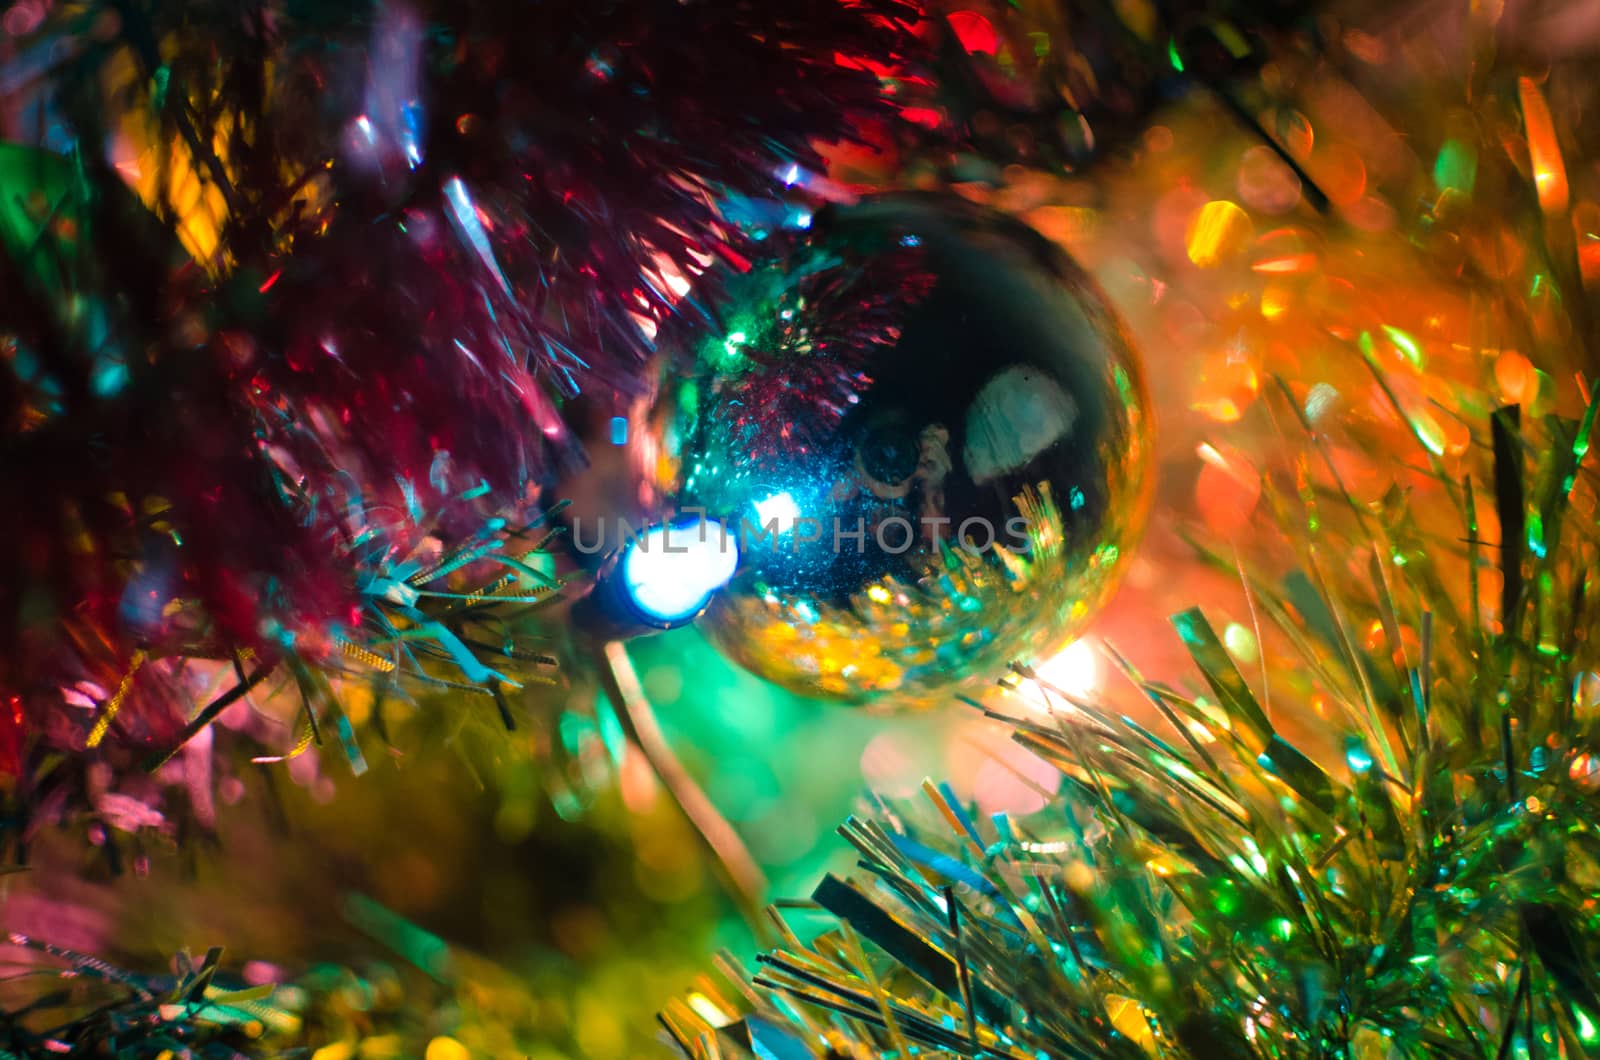 Photographers reflexion over a Christmas tree ball surrounded by colorful spumillion